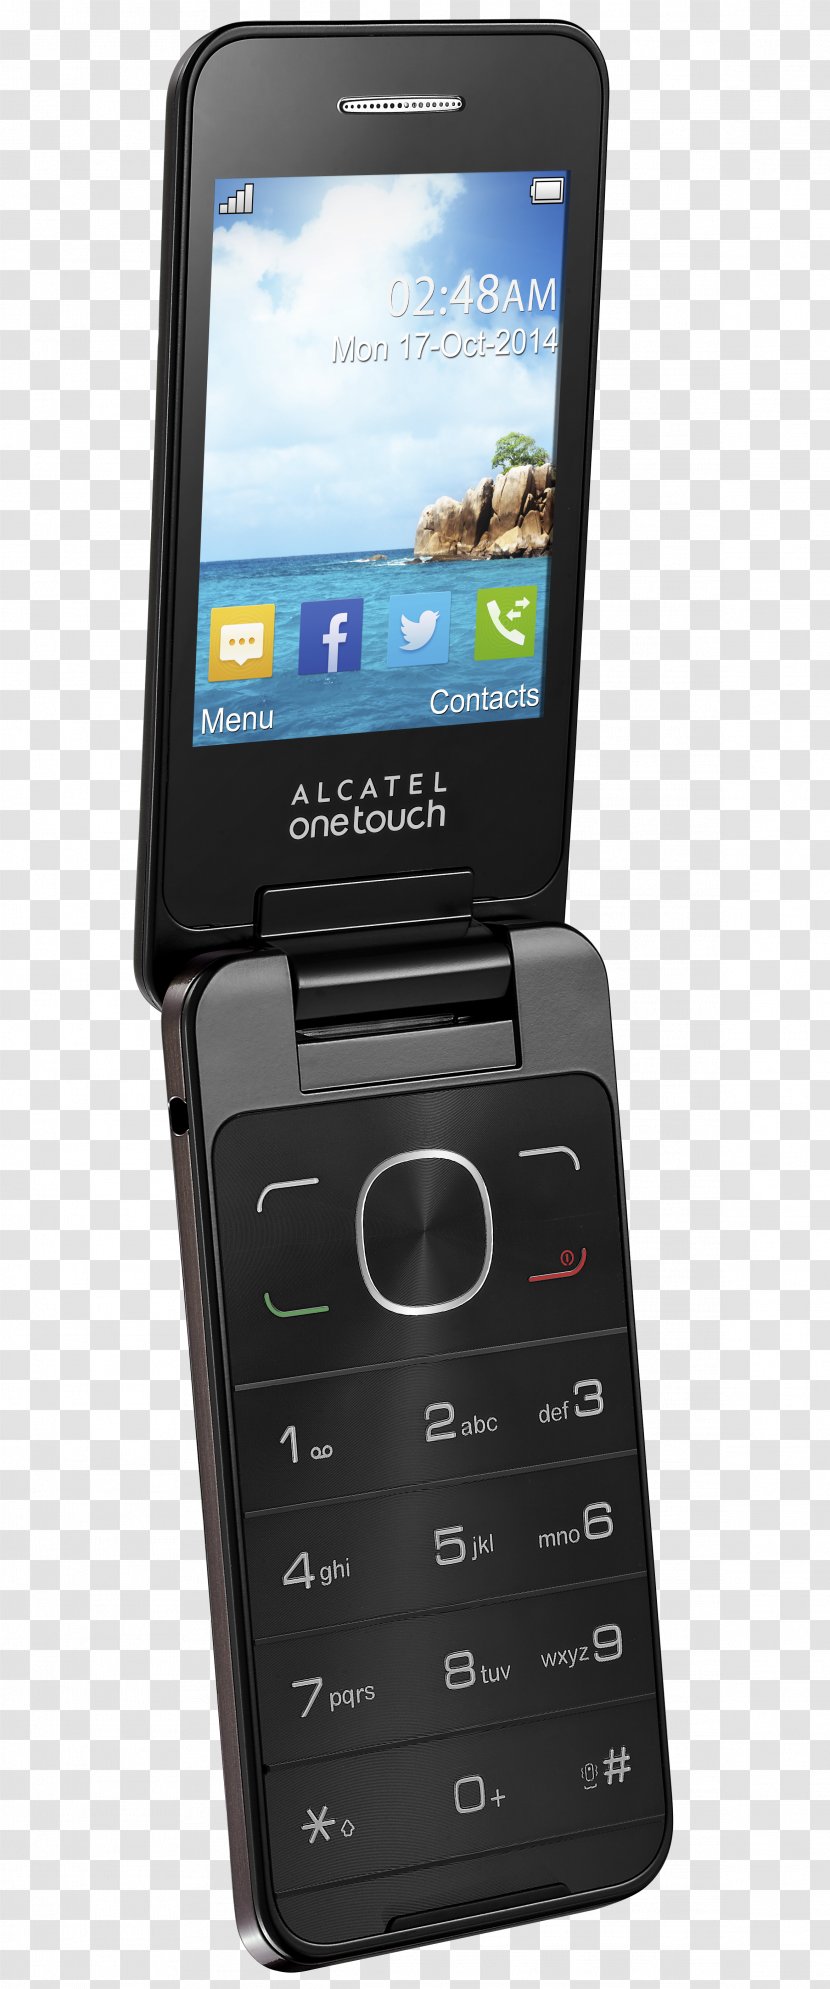 Alcatel One Touch Mobile Clamshell Design Telephone Smartphone - Dual Sim - Eating Chocolate Transparent PNG